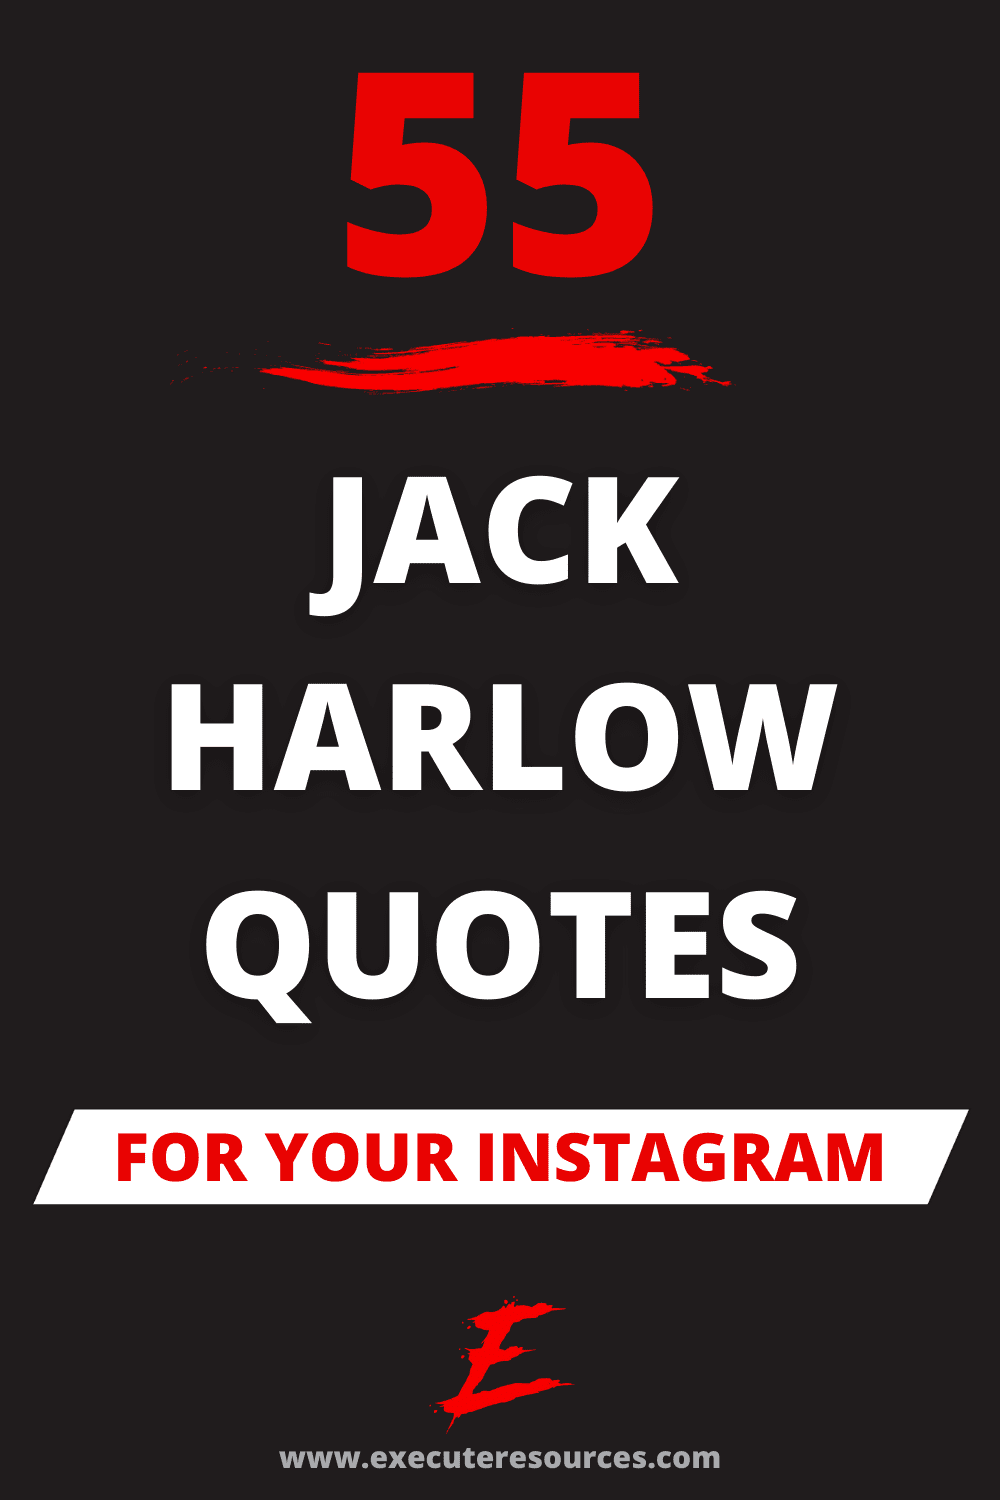 6 Inspirational Jack Harlow Quotes